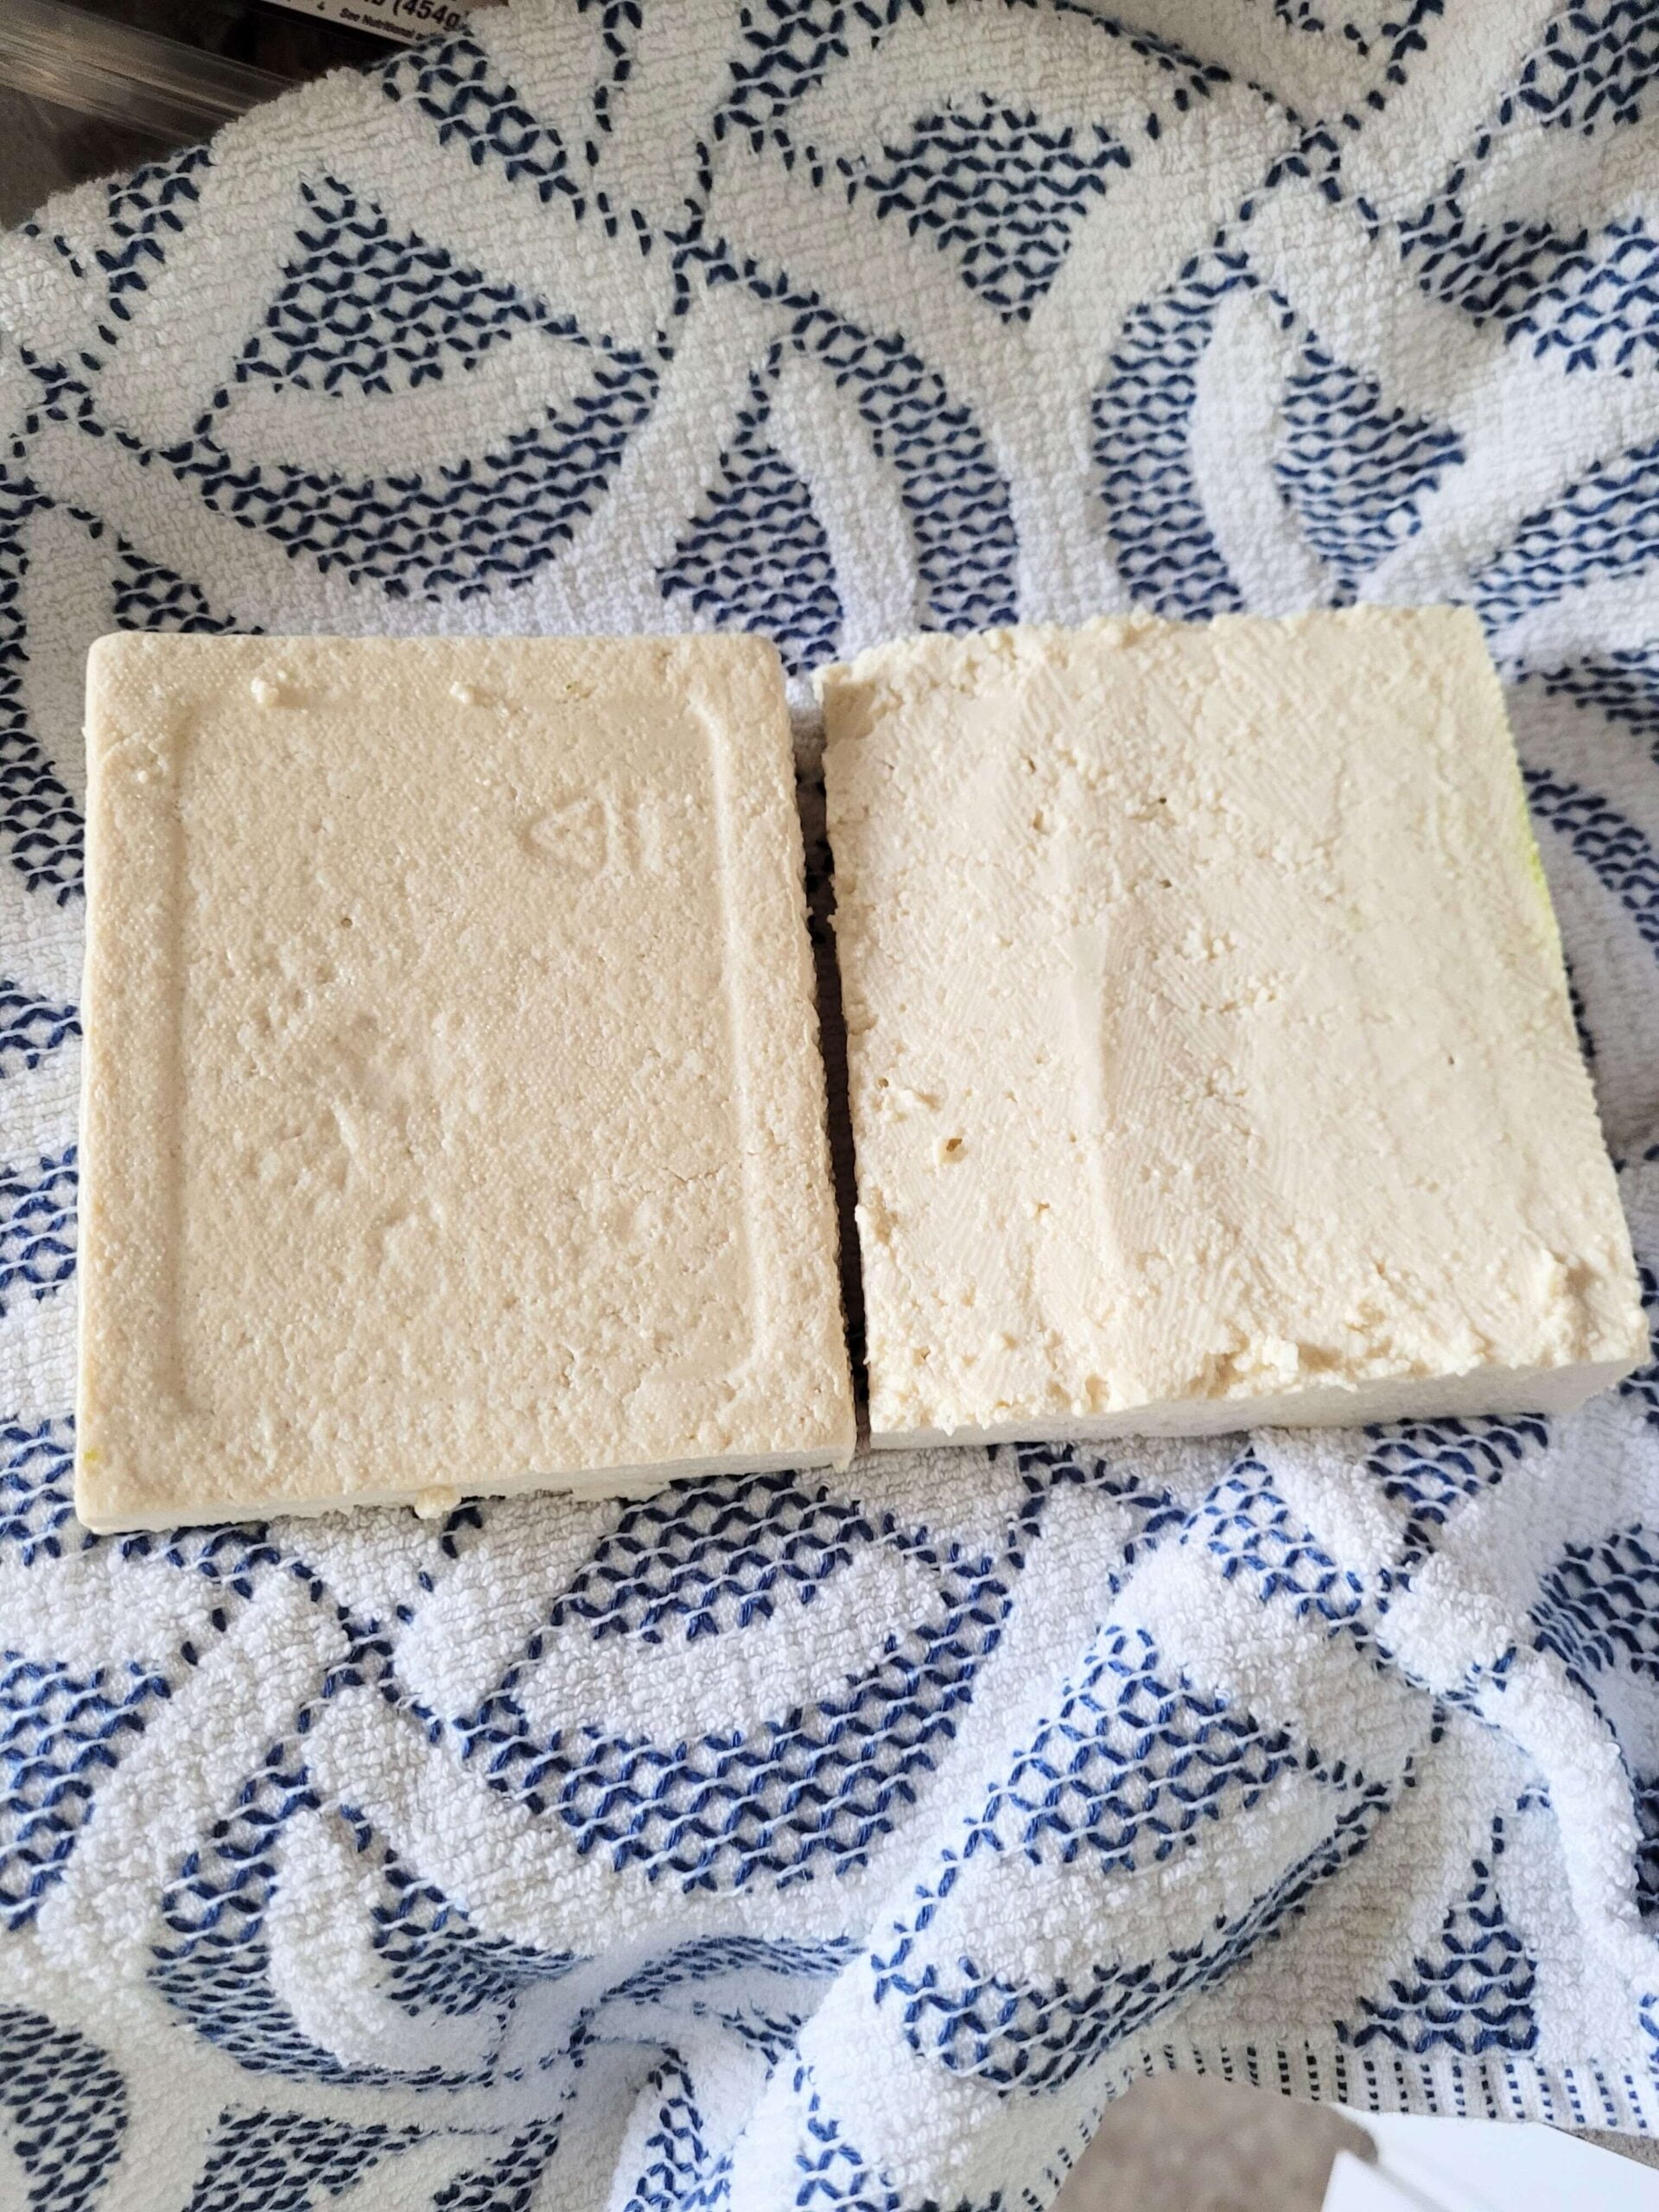 two slabs of tofu on a clean white and blue kitchen towel